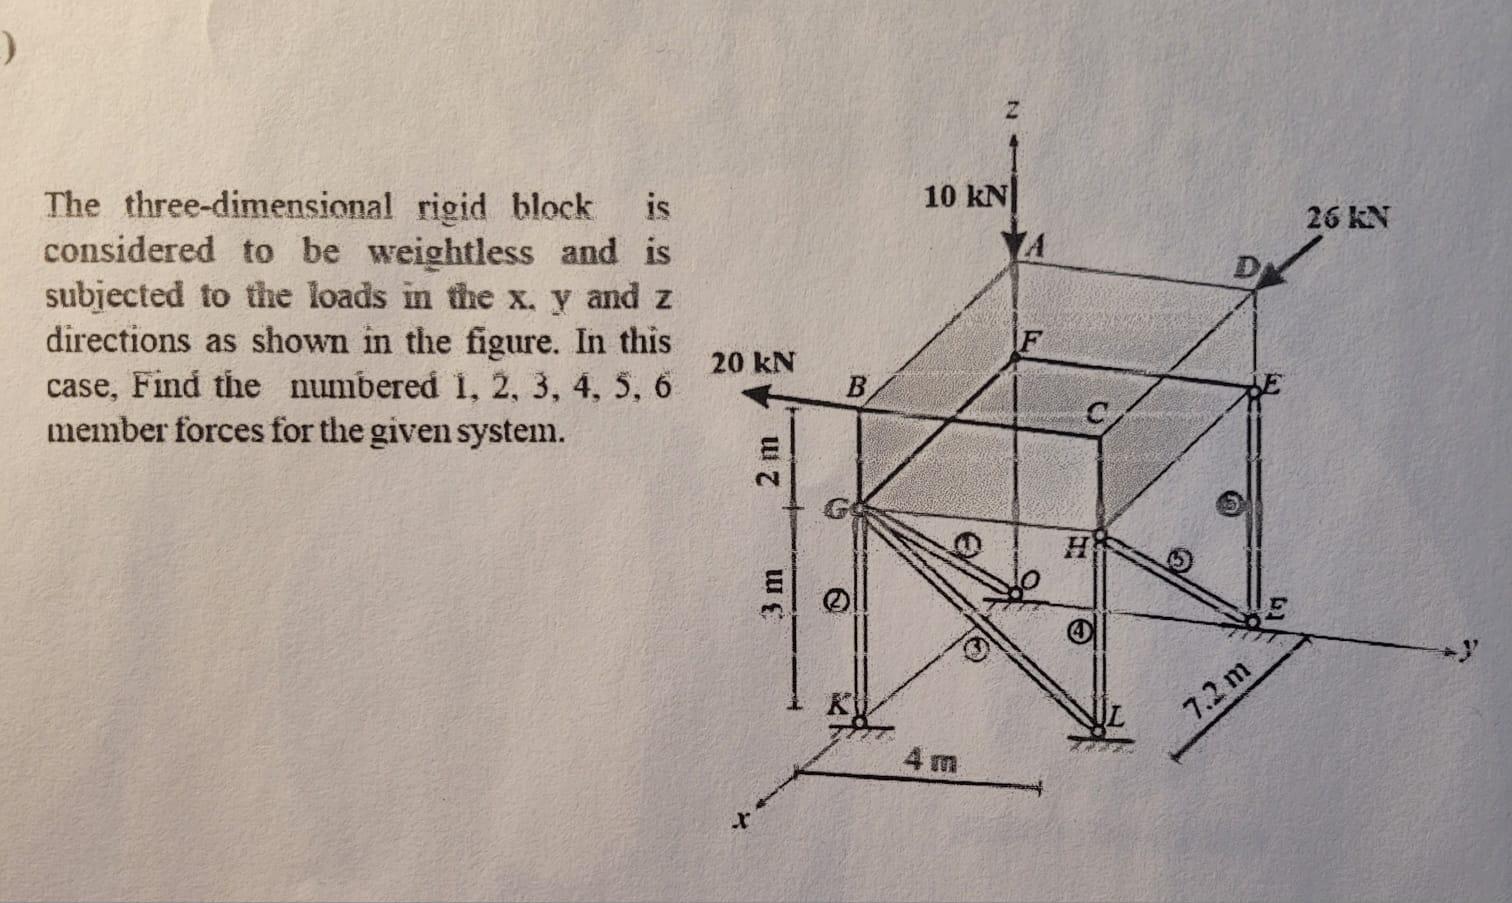 The three-dimensional rigid block is considered to be weightless and is subjected to the loads in the x. y